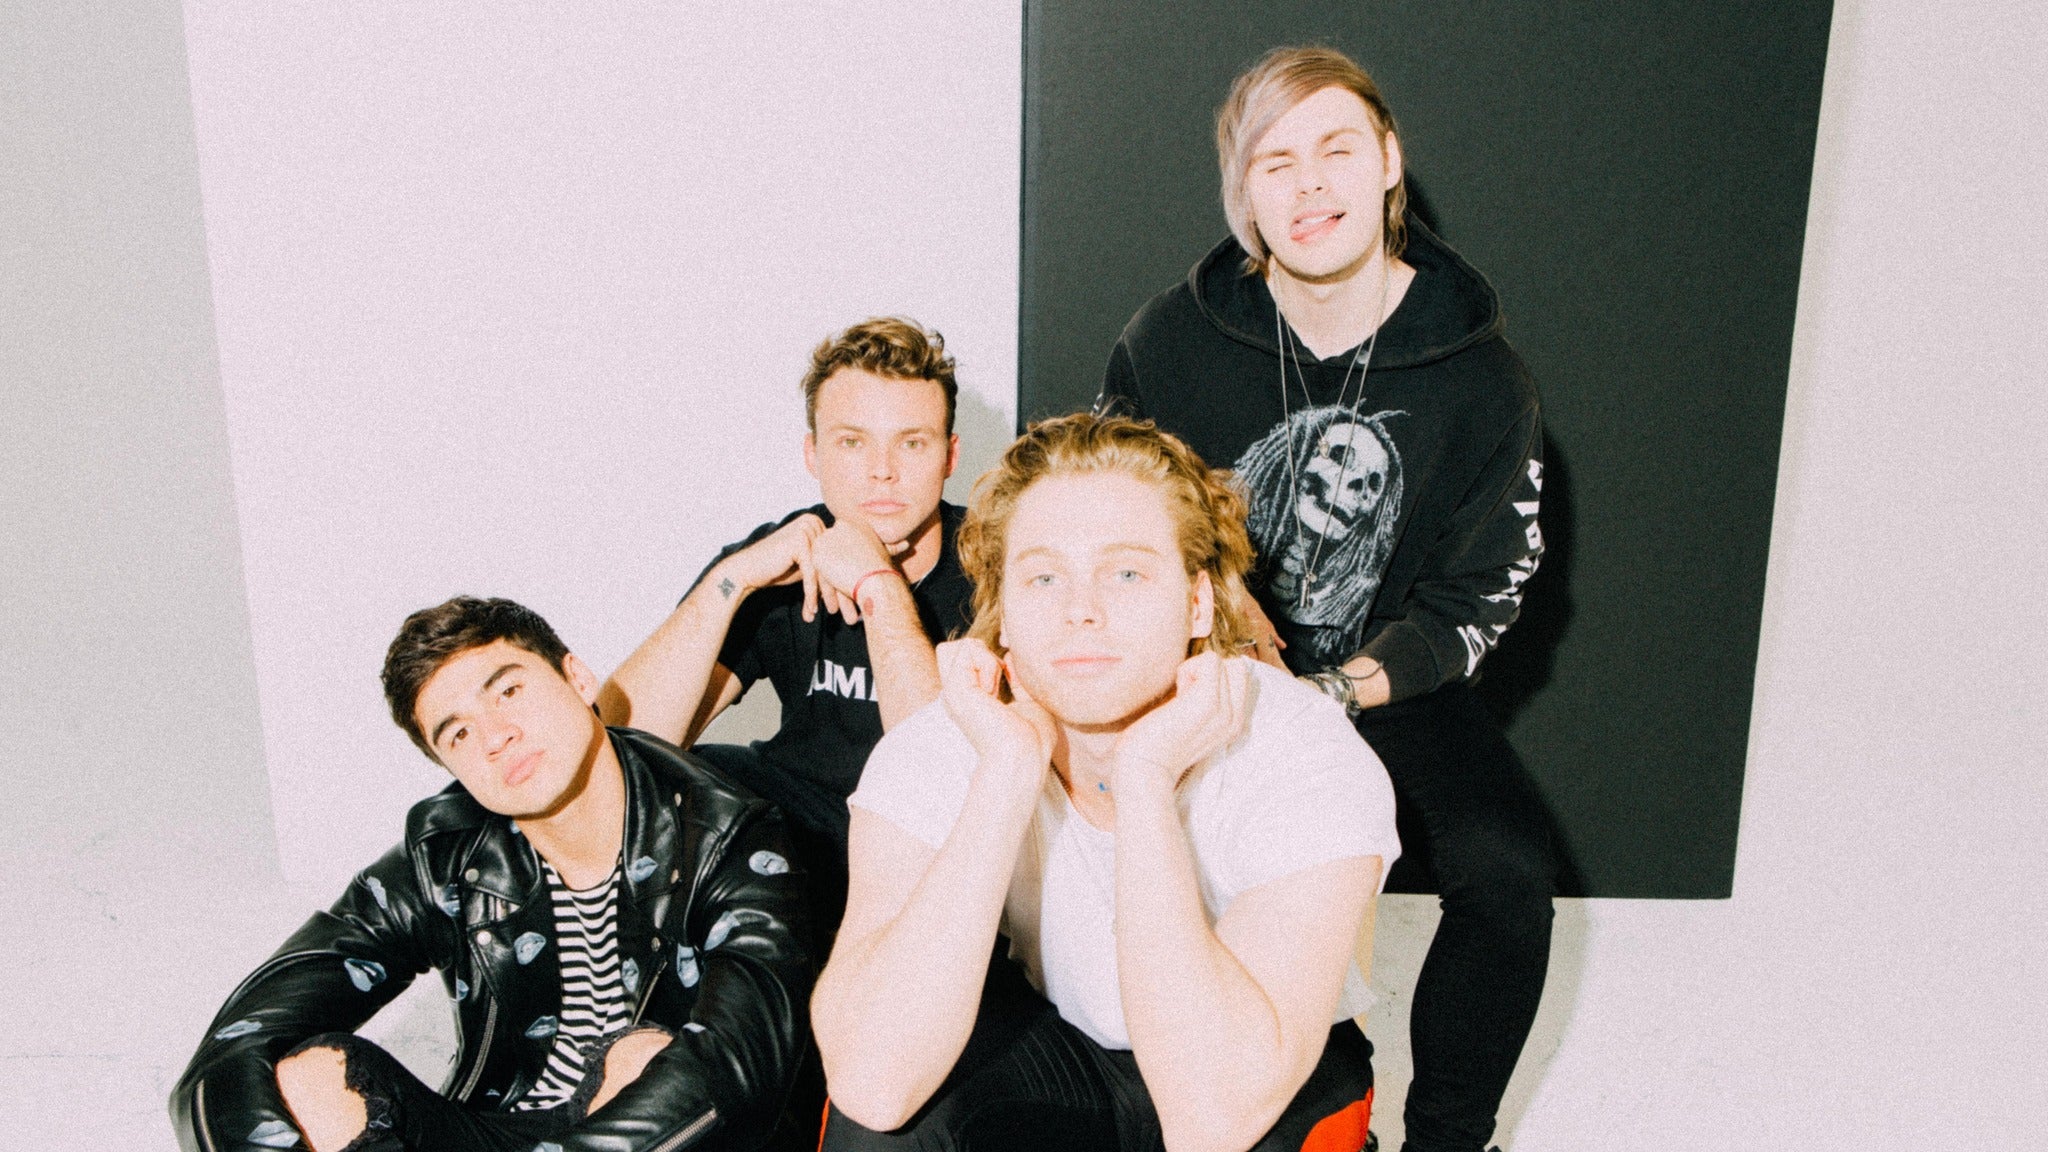 97.9 WNCI's Summer in The City featuring 5 Seconds of Summer in Columbus promo photo for VIP presale offer code